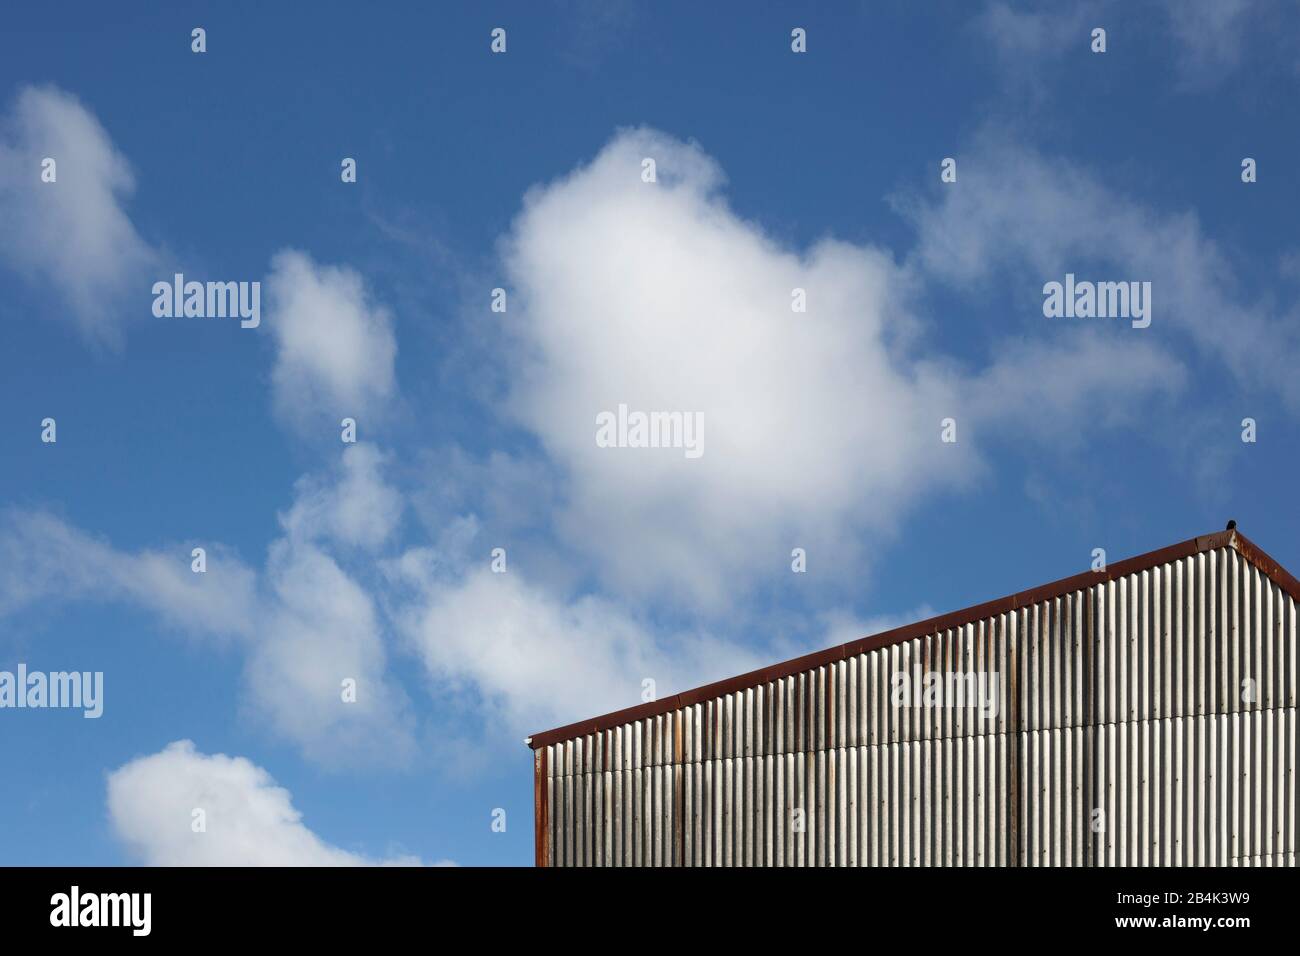 abstract photograph of the corner of a building with clouds in the background Stock Photo